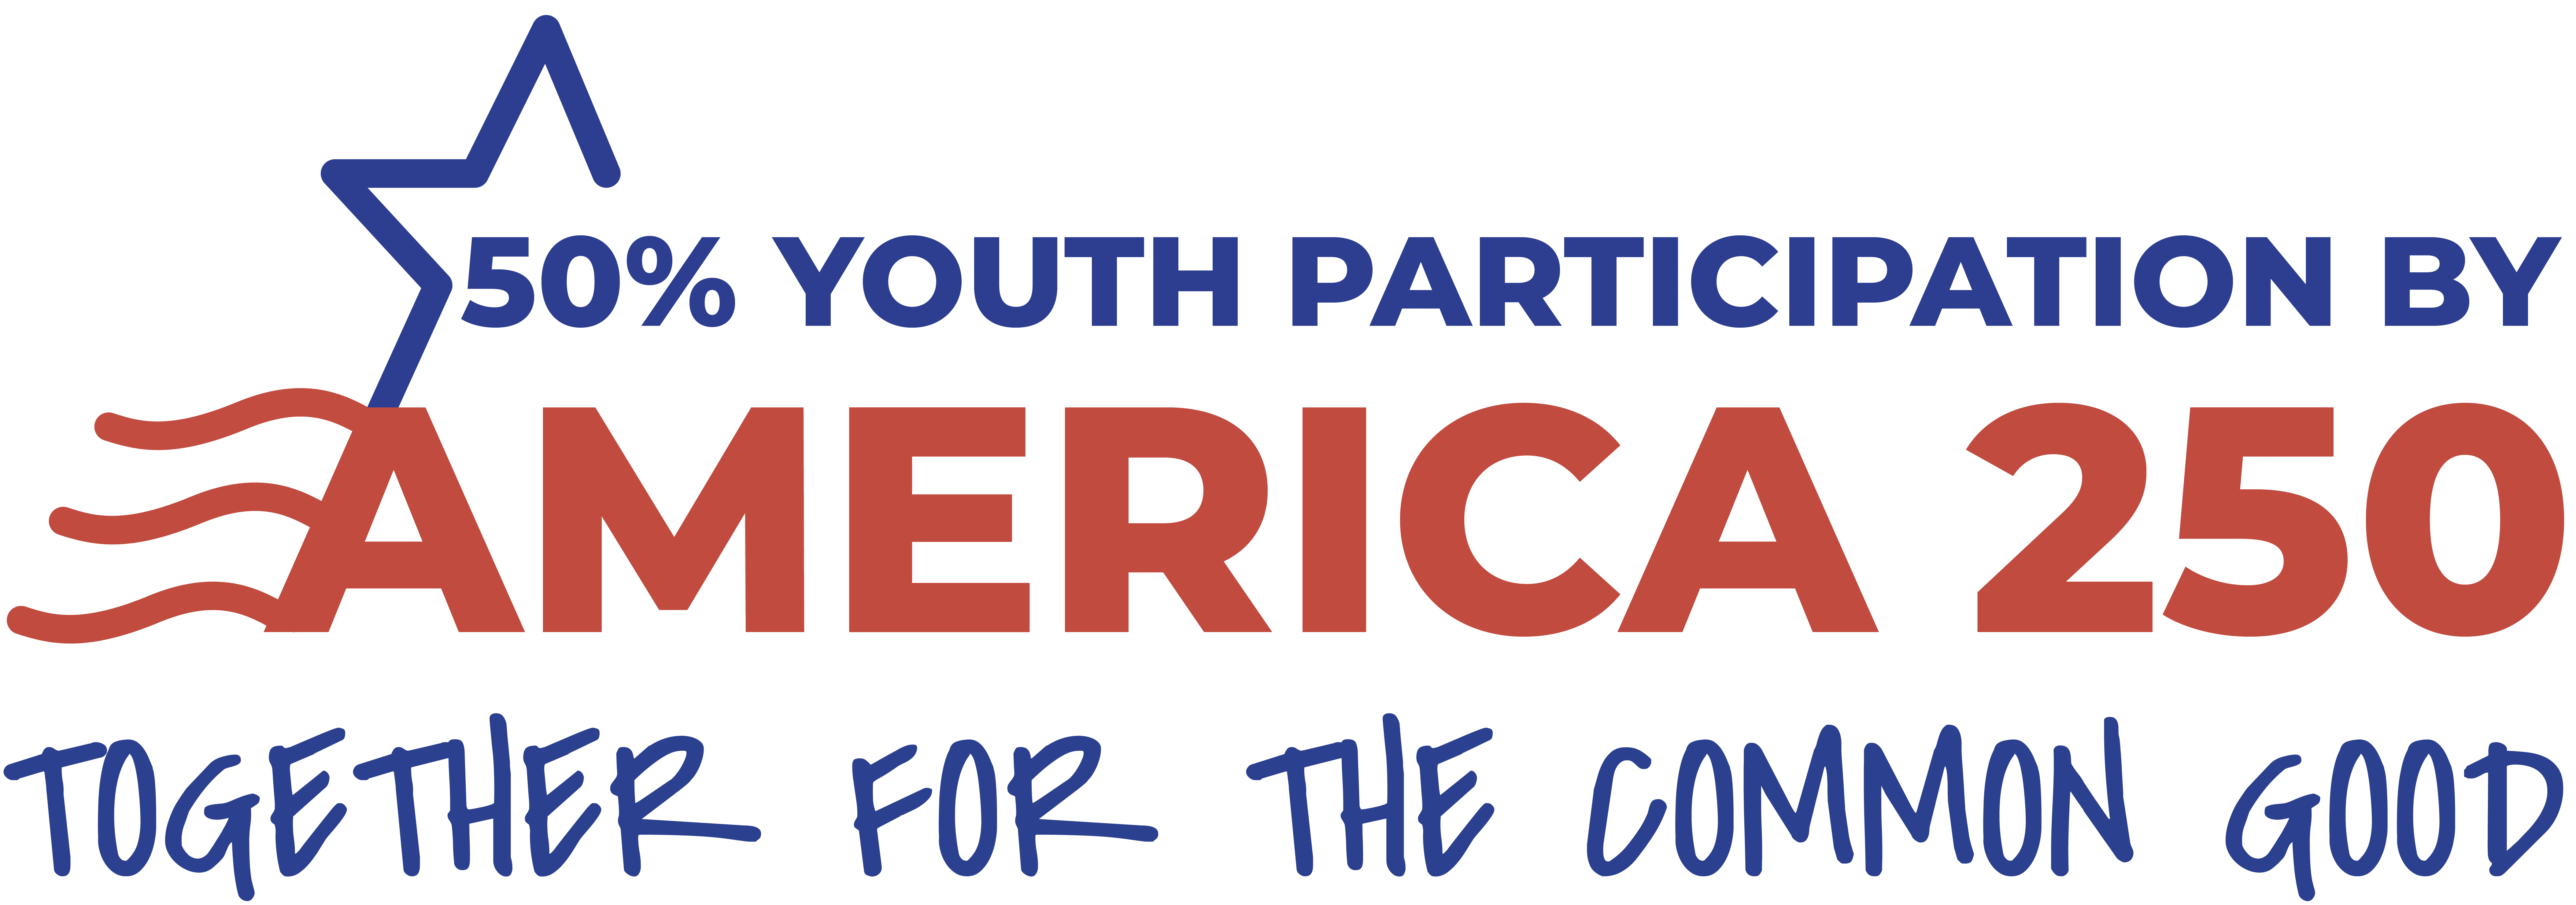 50% Youth Participation by America 250